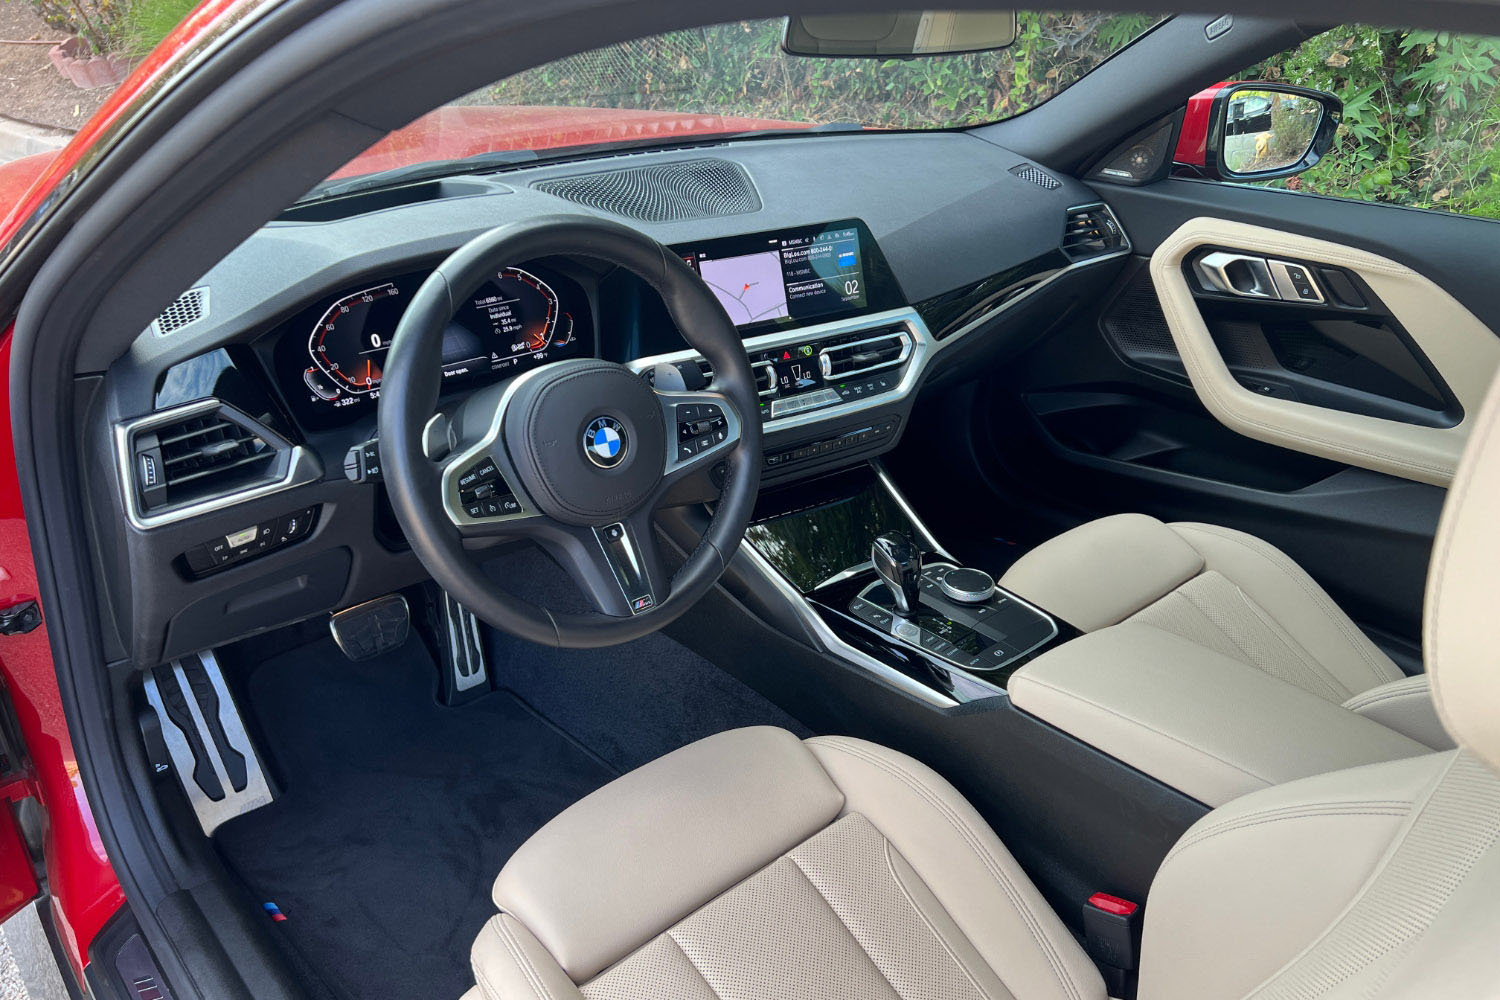 2022 BMW 2 Series Coupe interior, dashboard